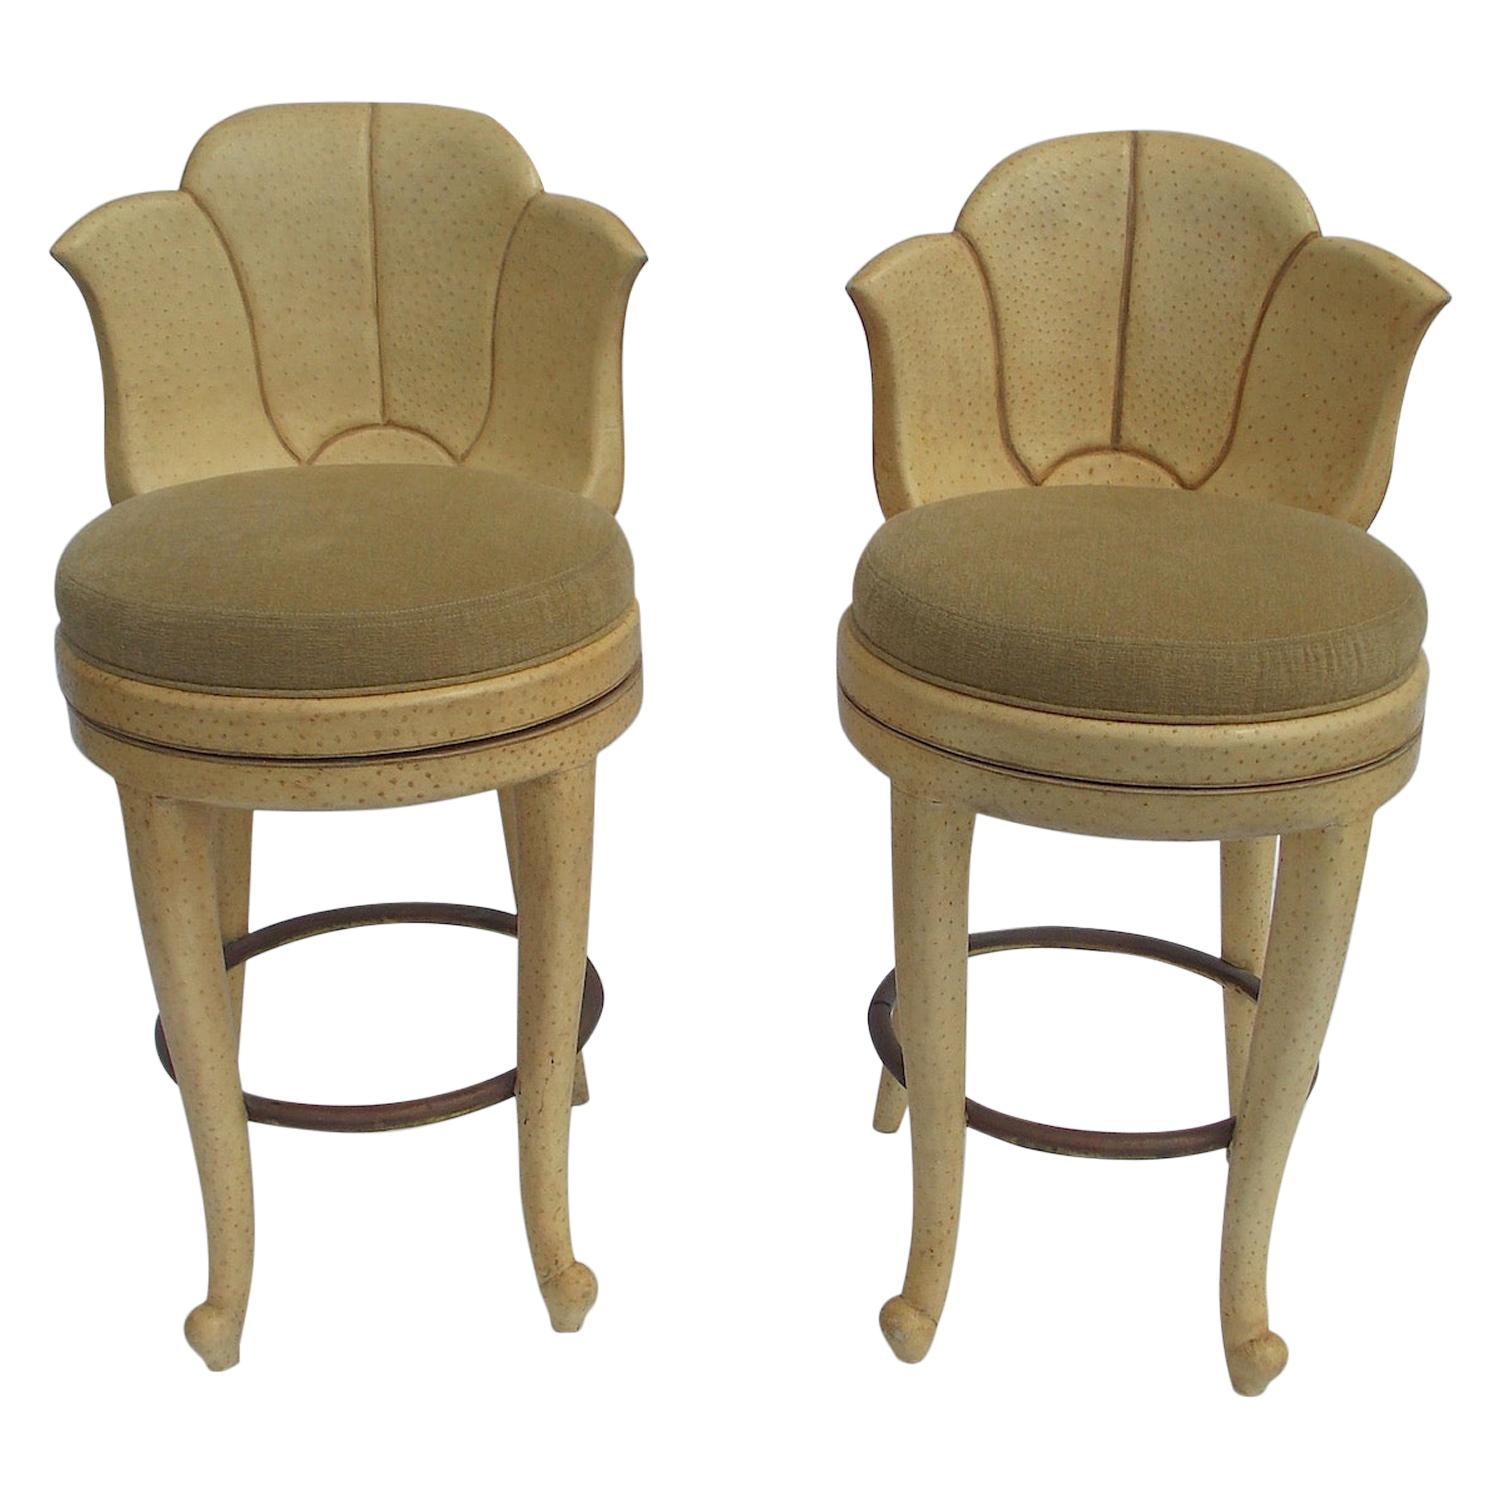 Ostrich Leather Bar Stools For Sale